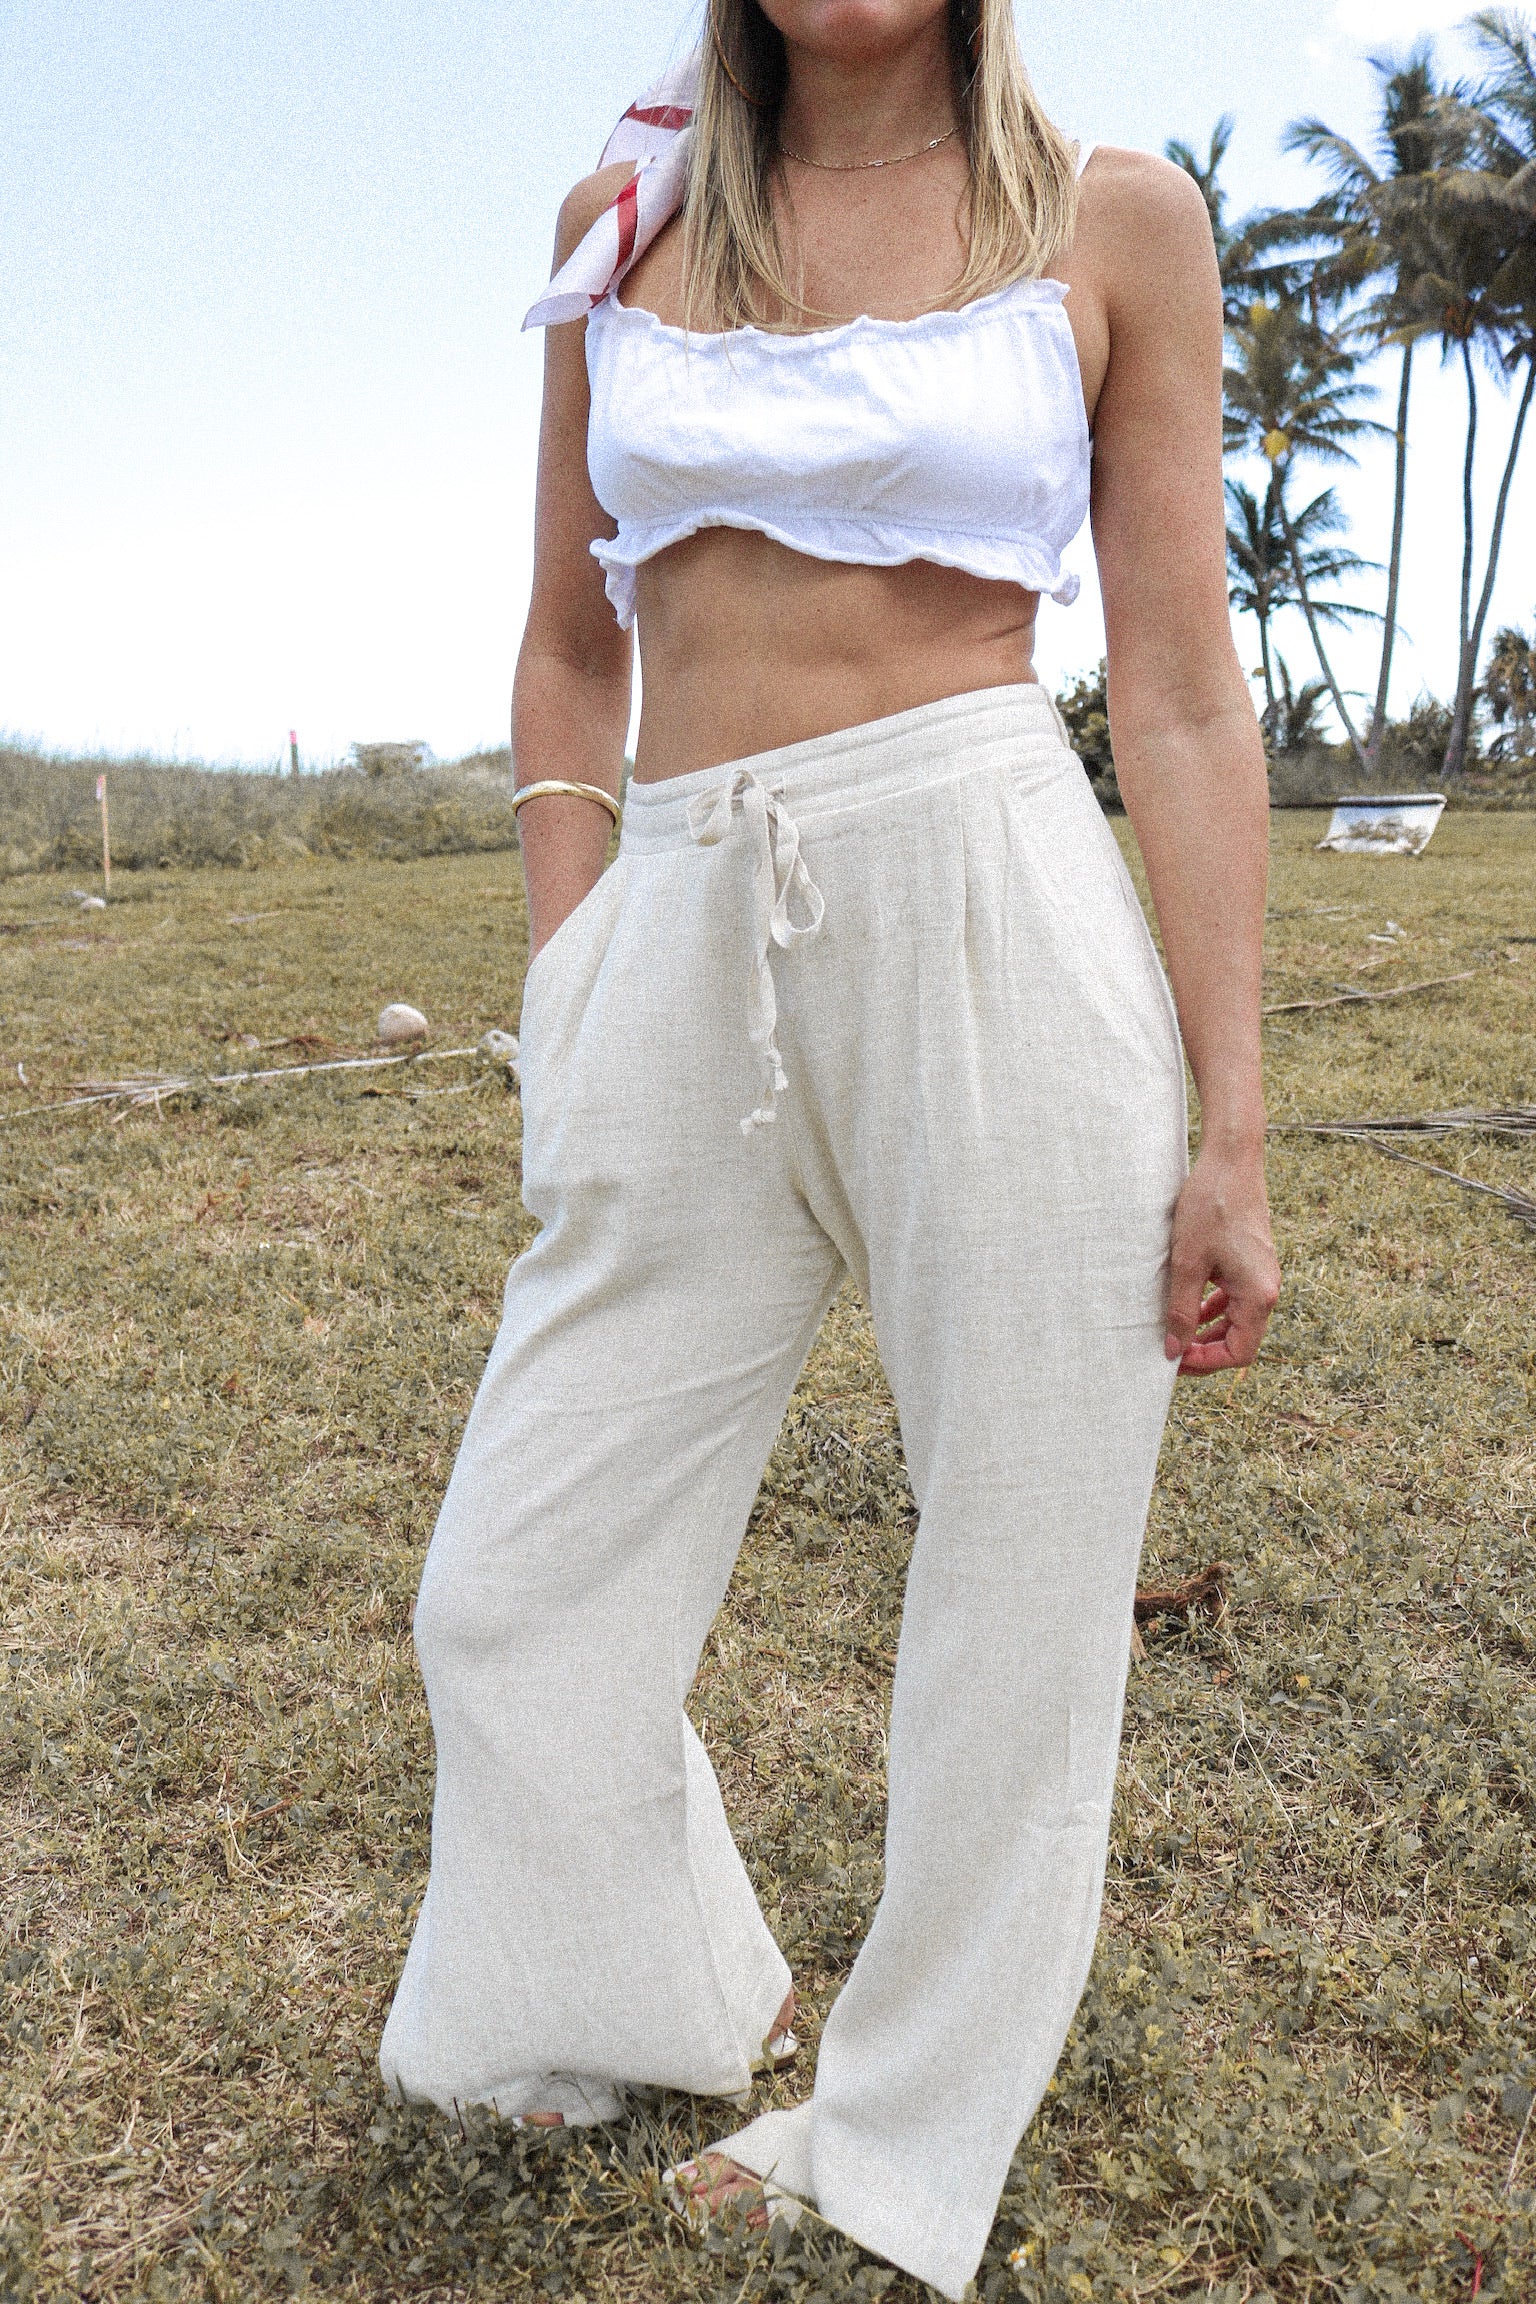 The Sable Wide Leg Linen Pants in Natural sold at Scarlette The Label, an online fashion boutique for women. Resort Wear Collection SS 2021